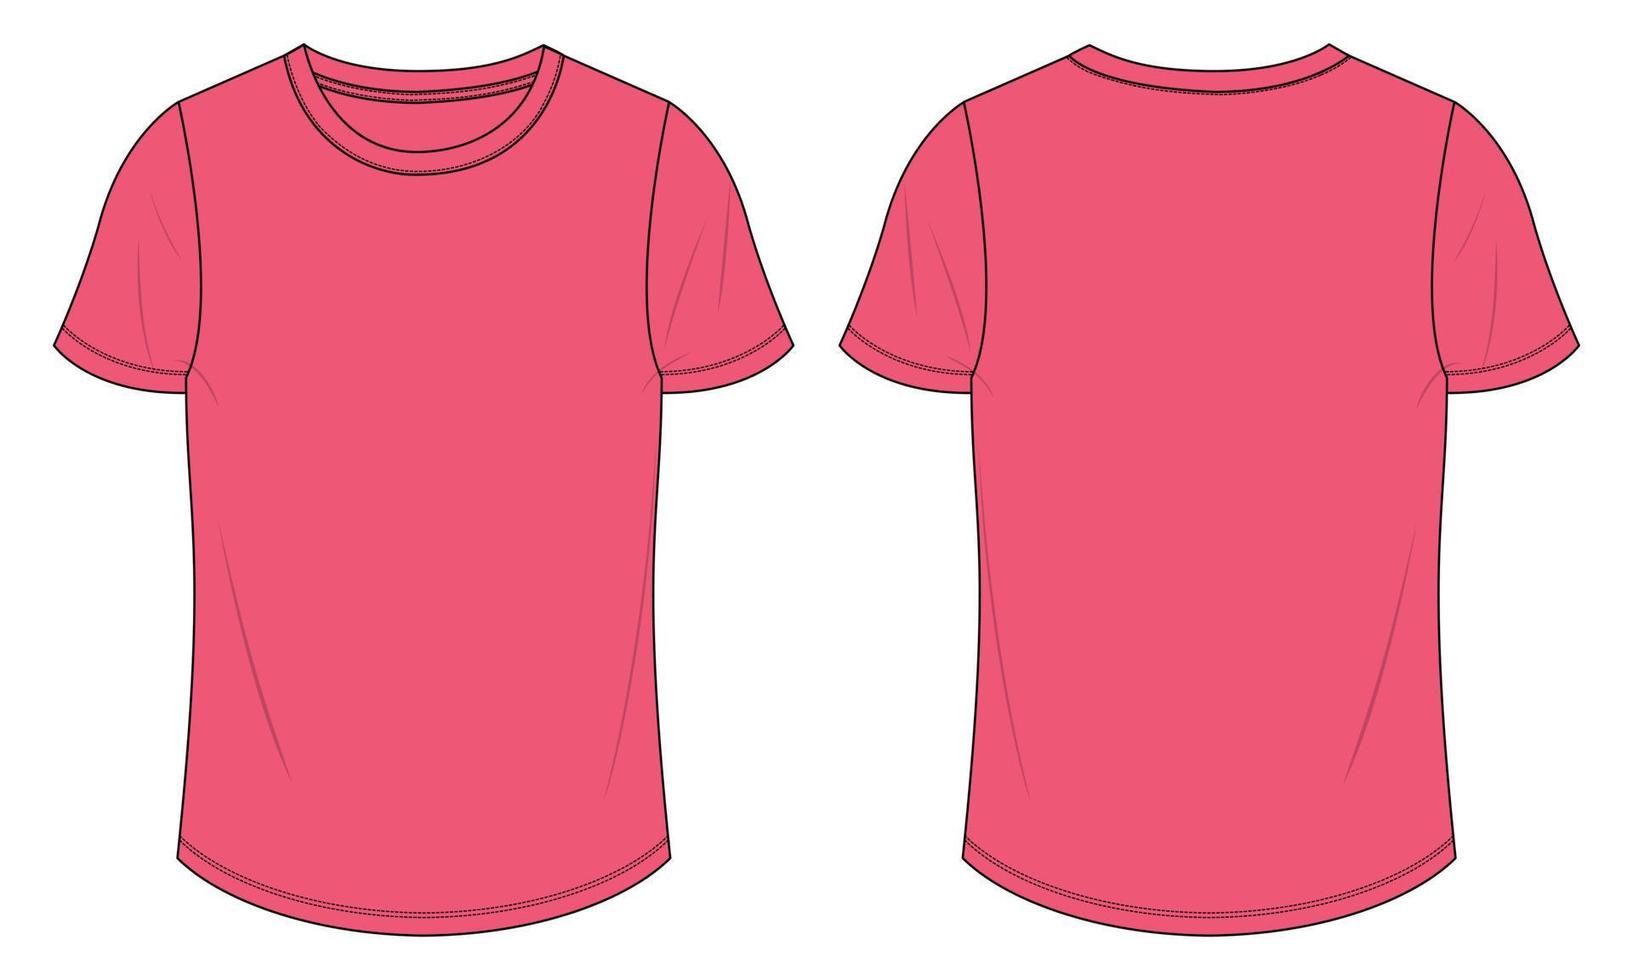 Short Sleeve t shirt Technical Fashion flat sketch Vector illustration Pink color template for Ladies.